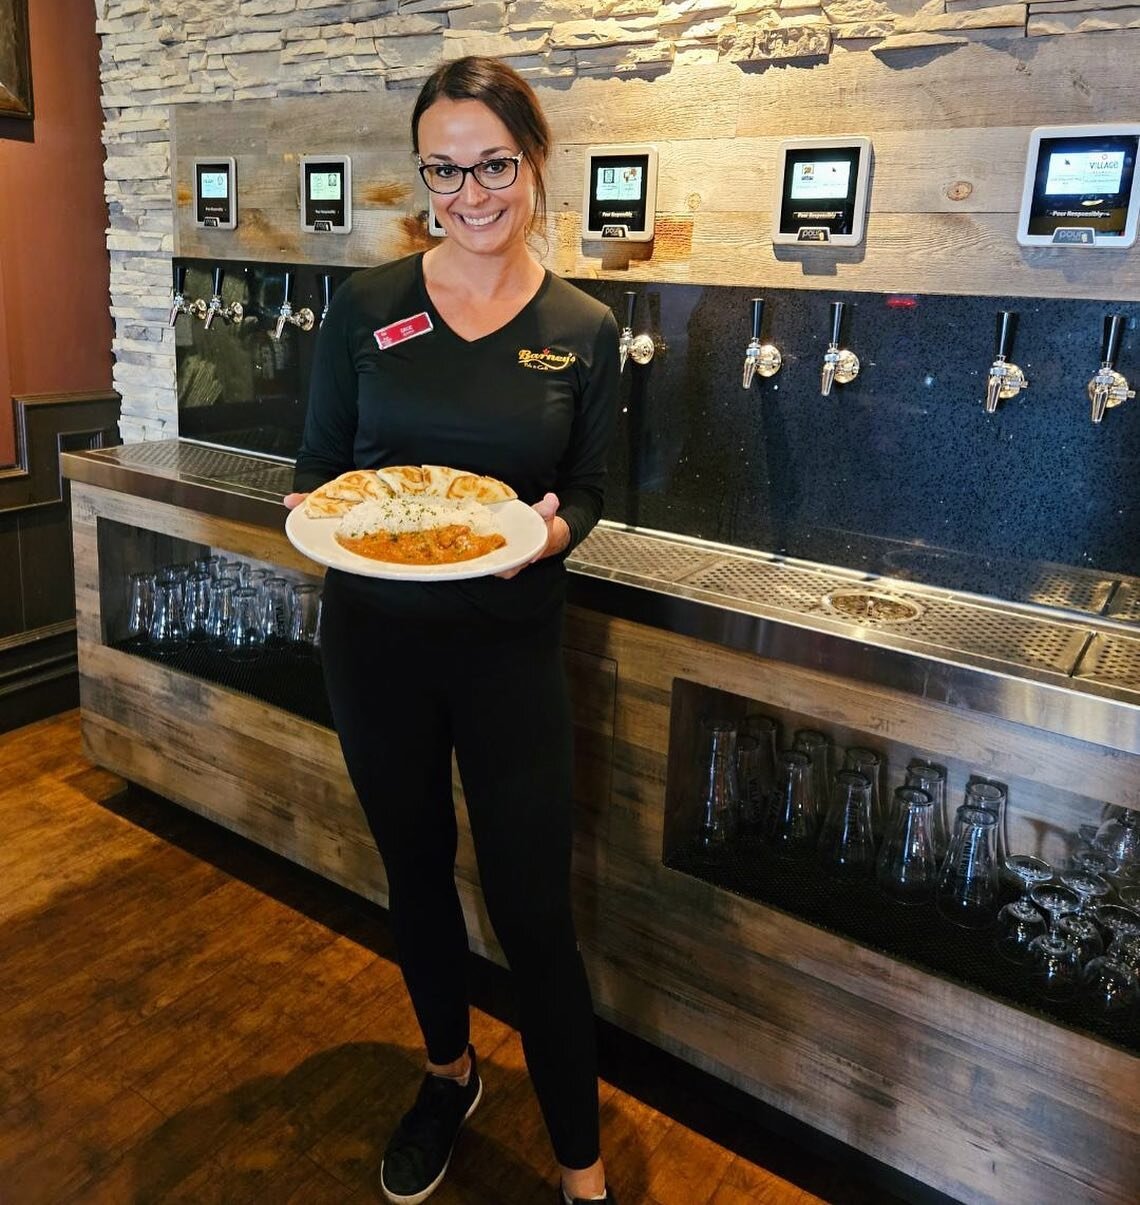 Please join us in officially welcoming Sage to the Barney&rsquo;s team! 👏

When she&rsquo;s not serving, you can find her cooking, baking, and travelling the world. Here at Barney&rsquo;s, you&rsquo;ll find her enjoying the Chicken Tikka Masala alon